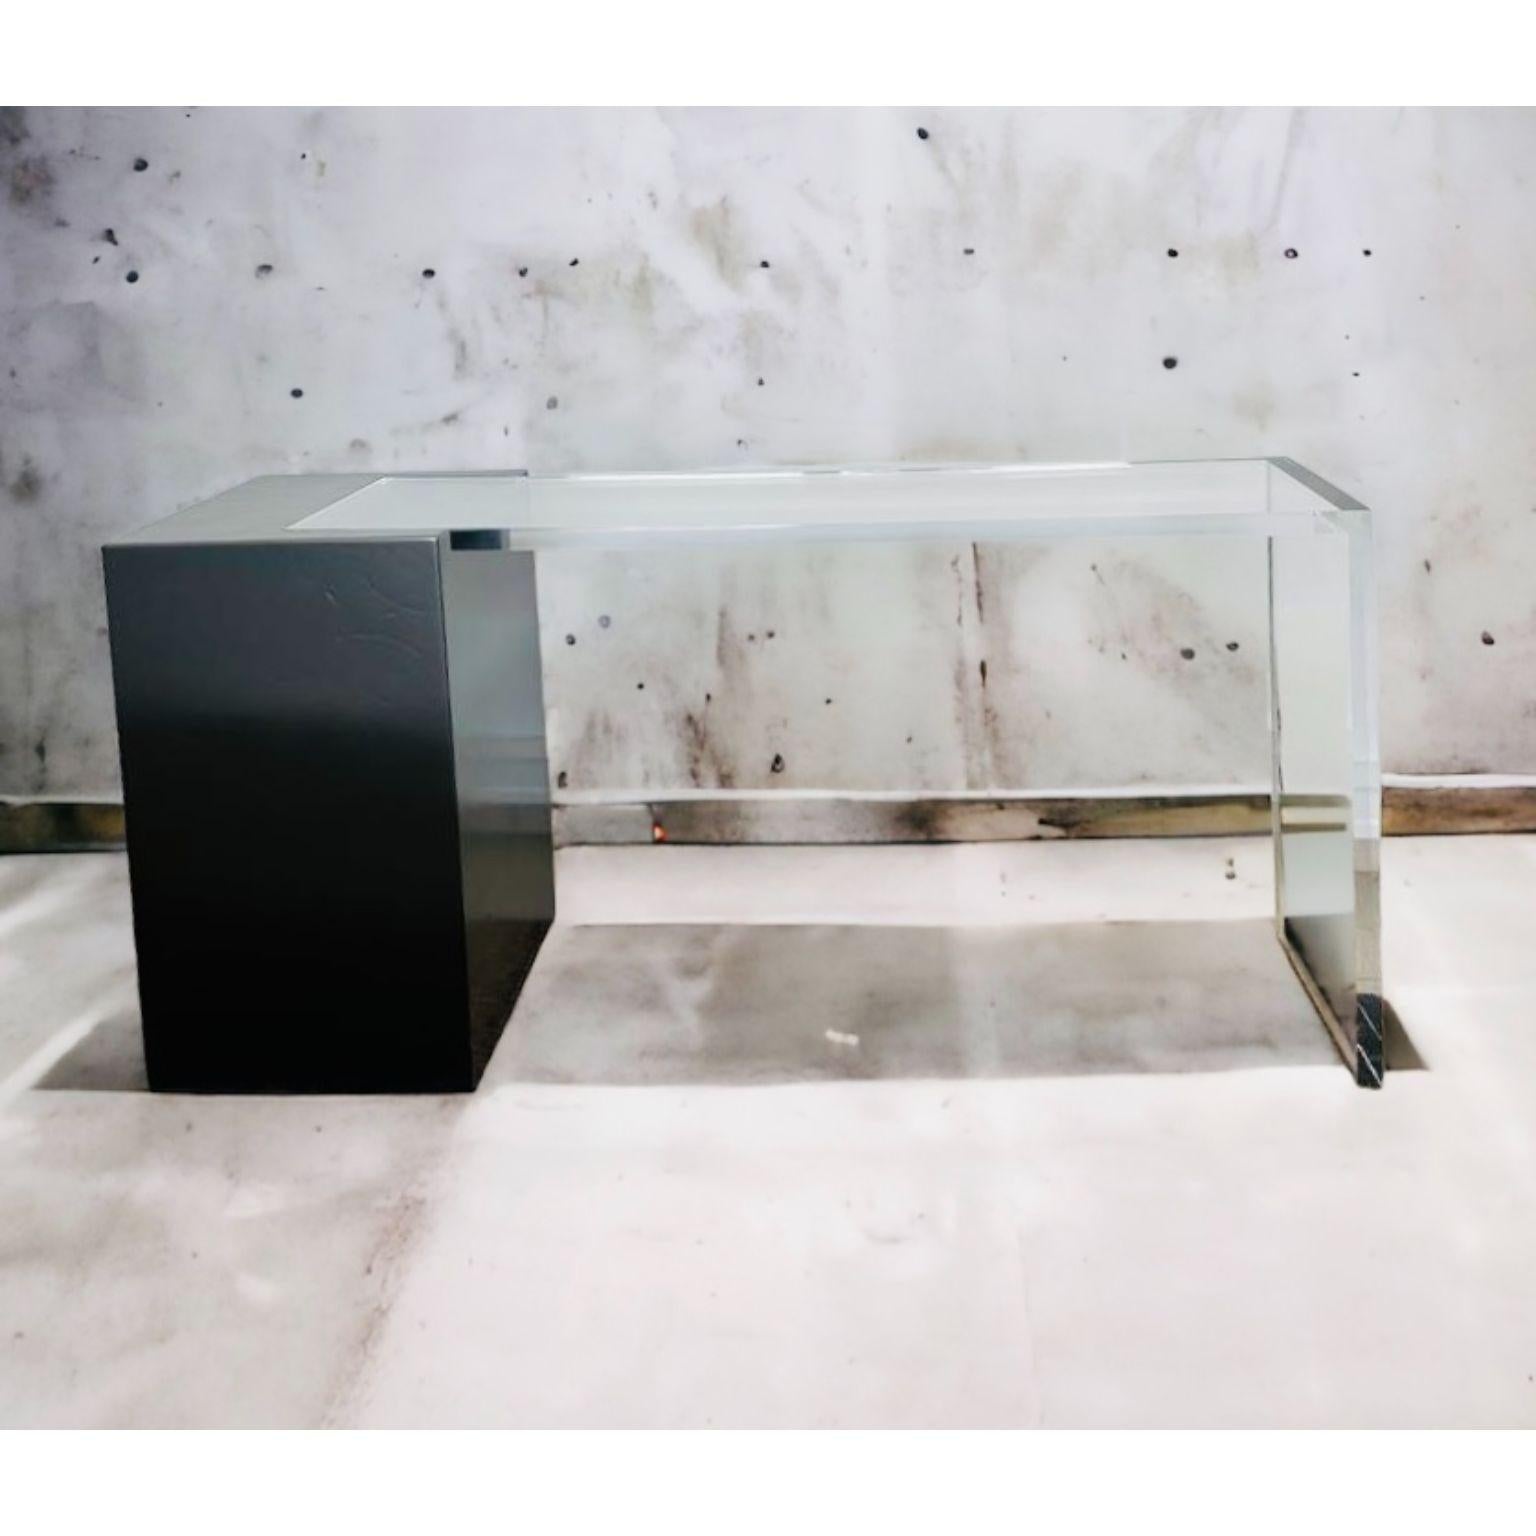 Ghost Black Console Table by Charly Bounan
One of a Kind
Dimensions: D 35 x W 150 x H 75 cm. 
Materials: Acrylic glass and painted steel.

Also available in a different color option. Please contact us.

Charly Bounan, is a Parisian designer renowned